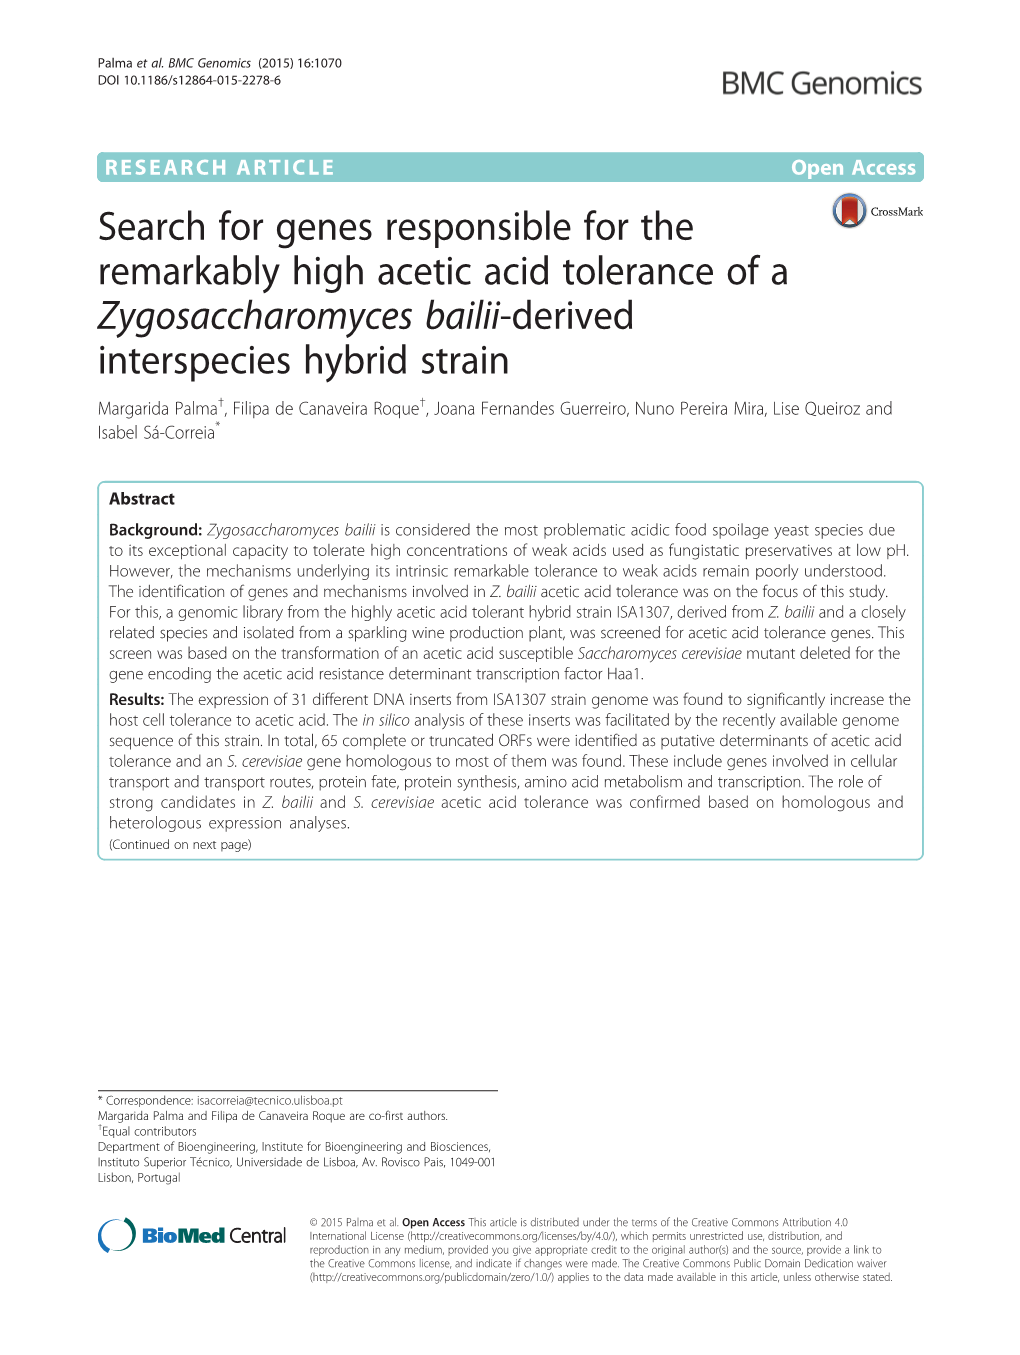 Search for Genes Responsible for the Remarkably High Acetic Acid Tolerance of a Zygosaccharomyces Bailii-Derived Interspecies Hy